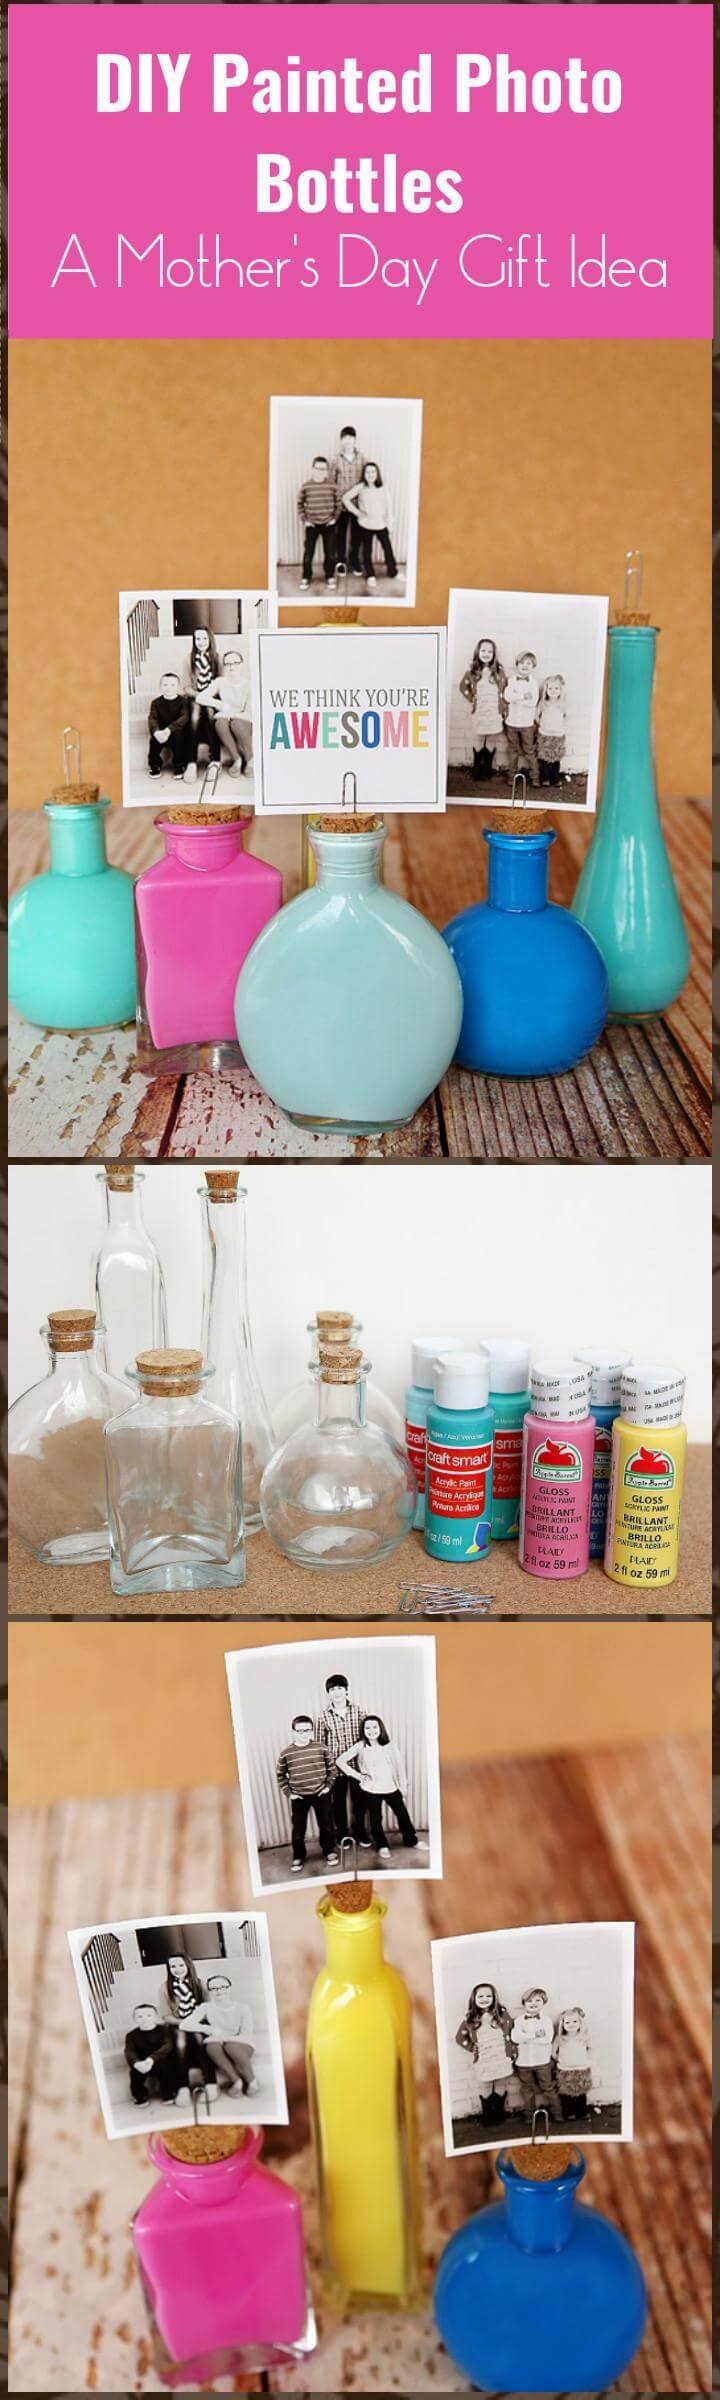 DIY painted photo bottles for Mother's Day